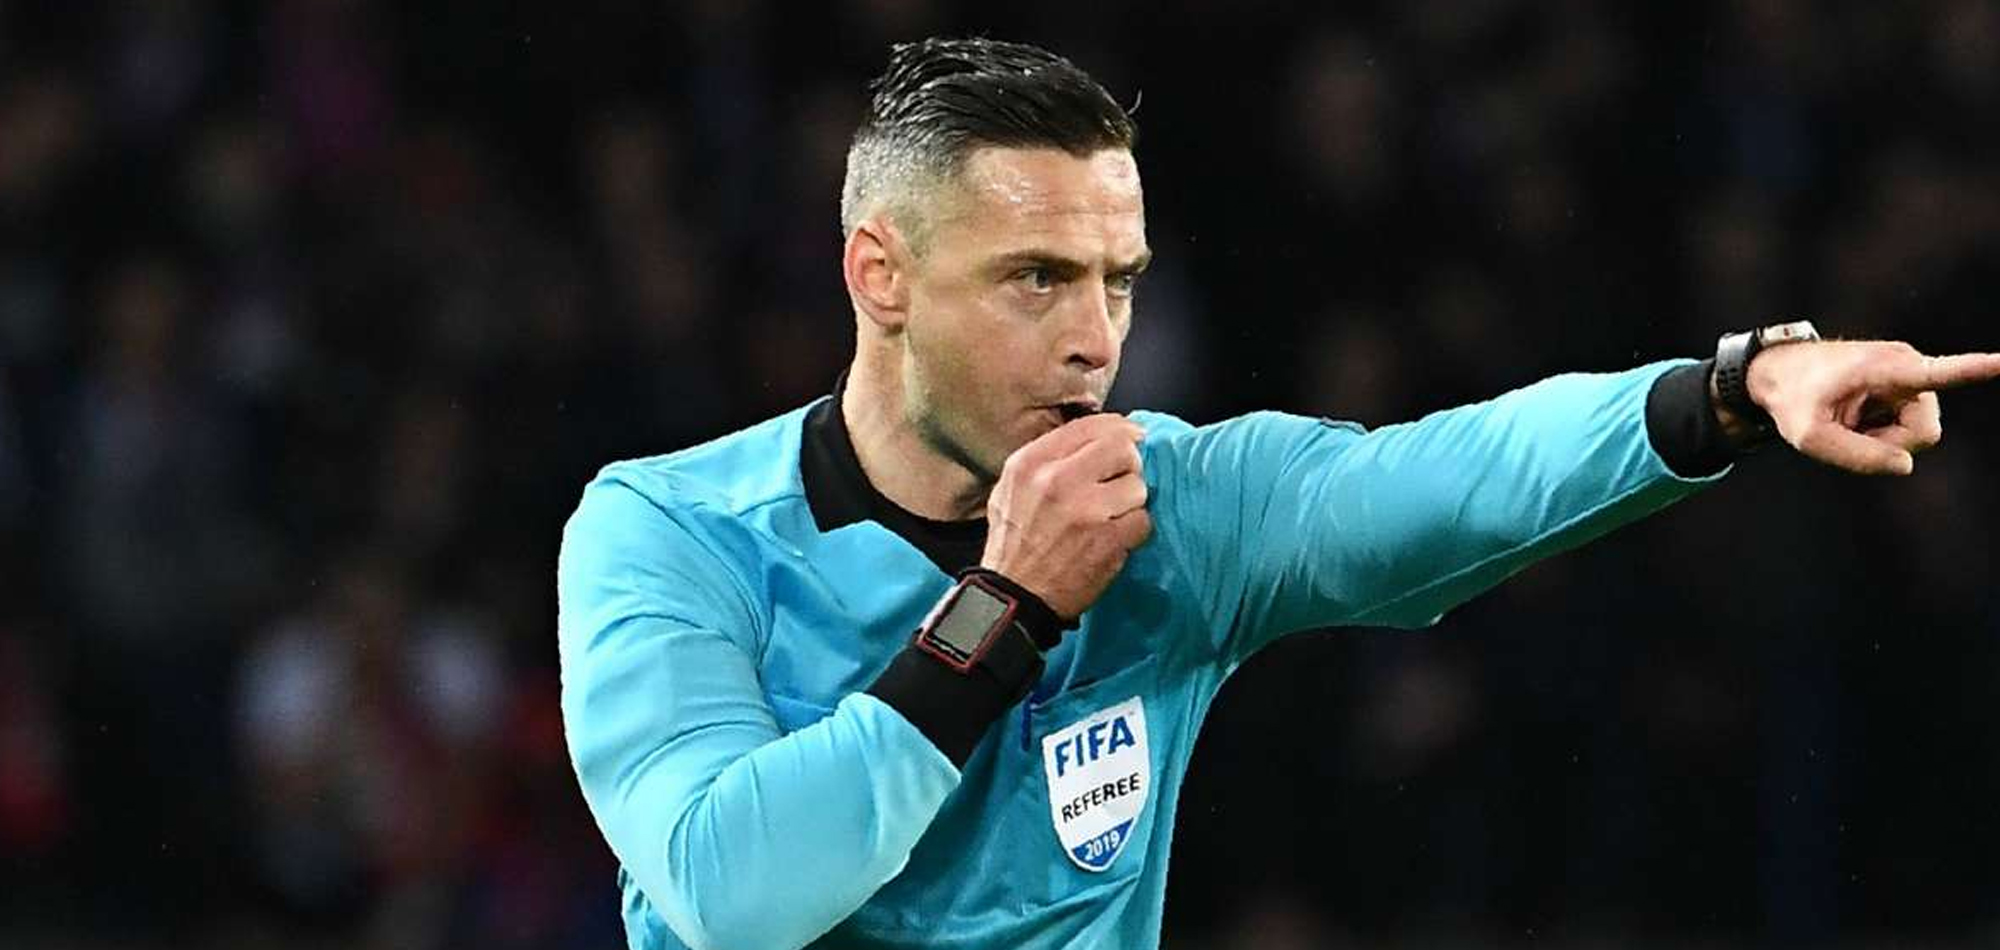 UEFA TO BRING IN VAR FOR WORLD CUP QUALIFIERS